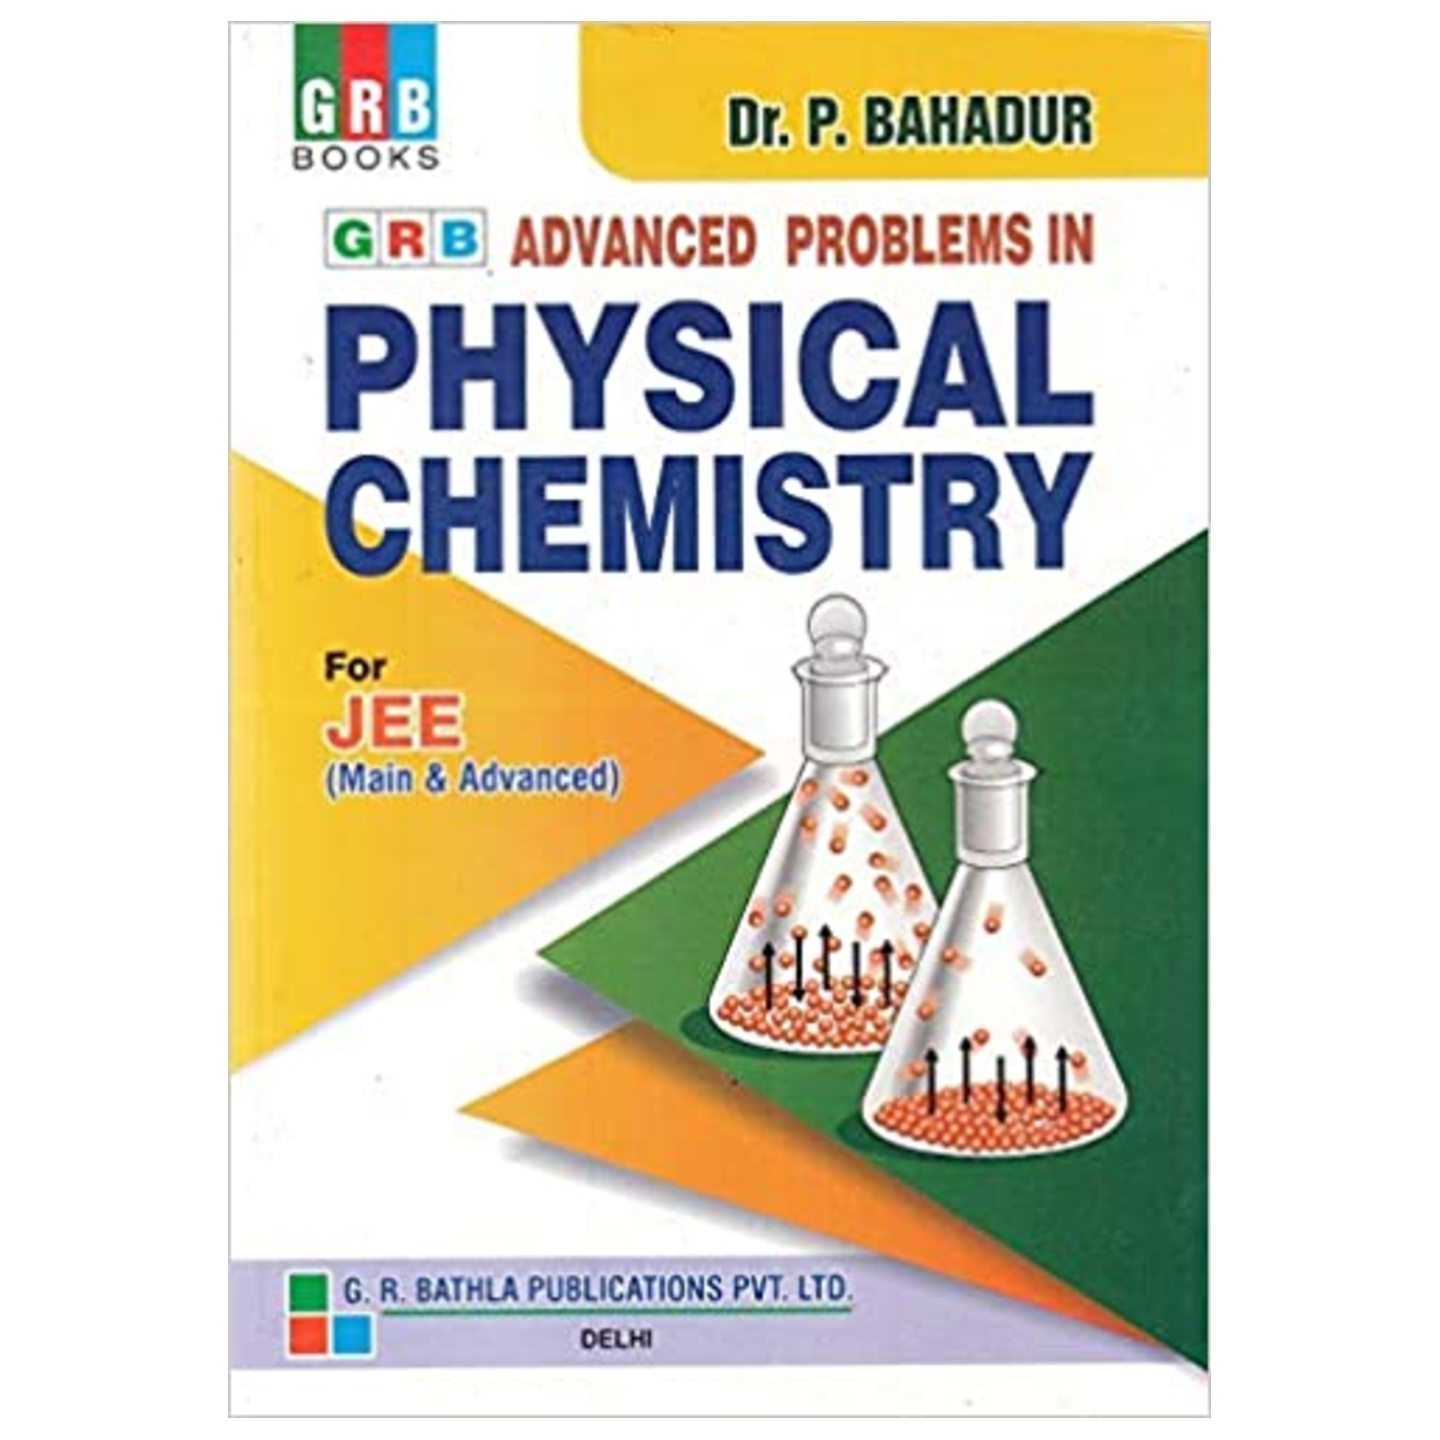 GRB Advanced Problems in Physical Chemistry for JEE Main & Advanced P BAHADUR